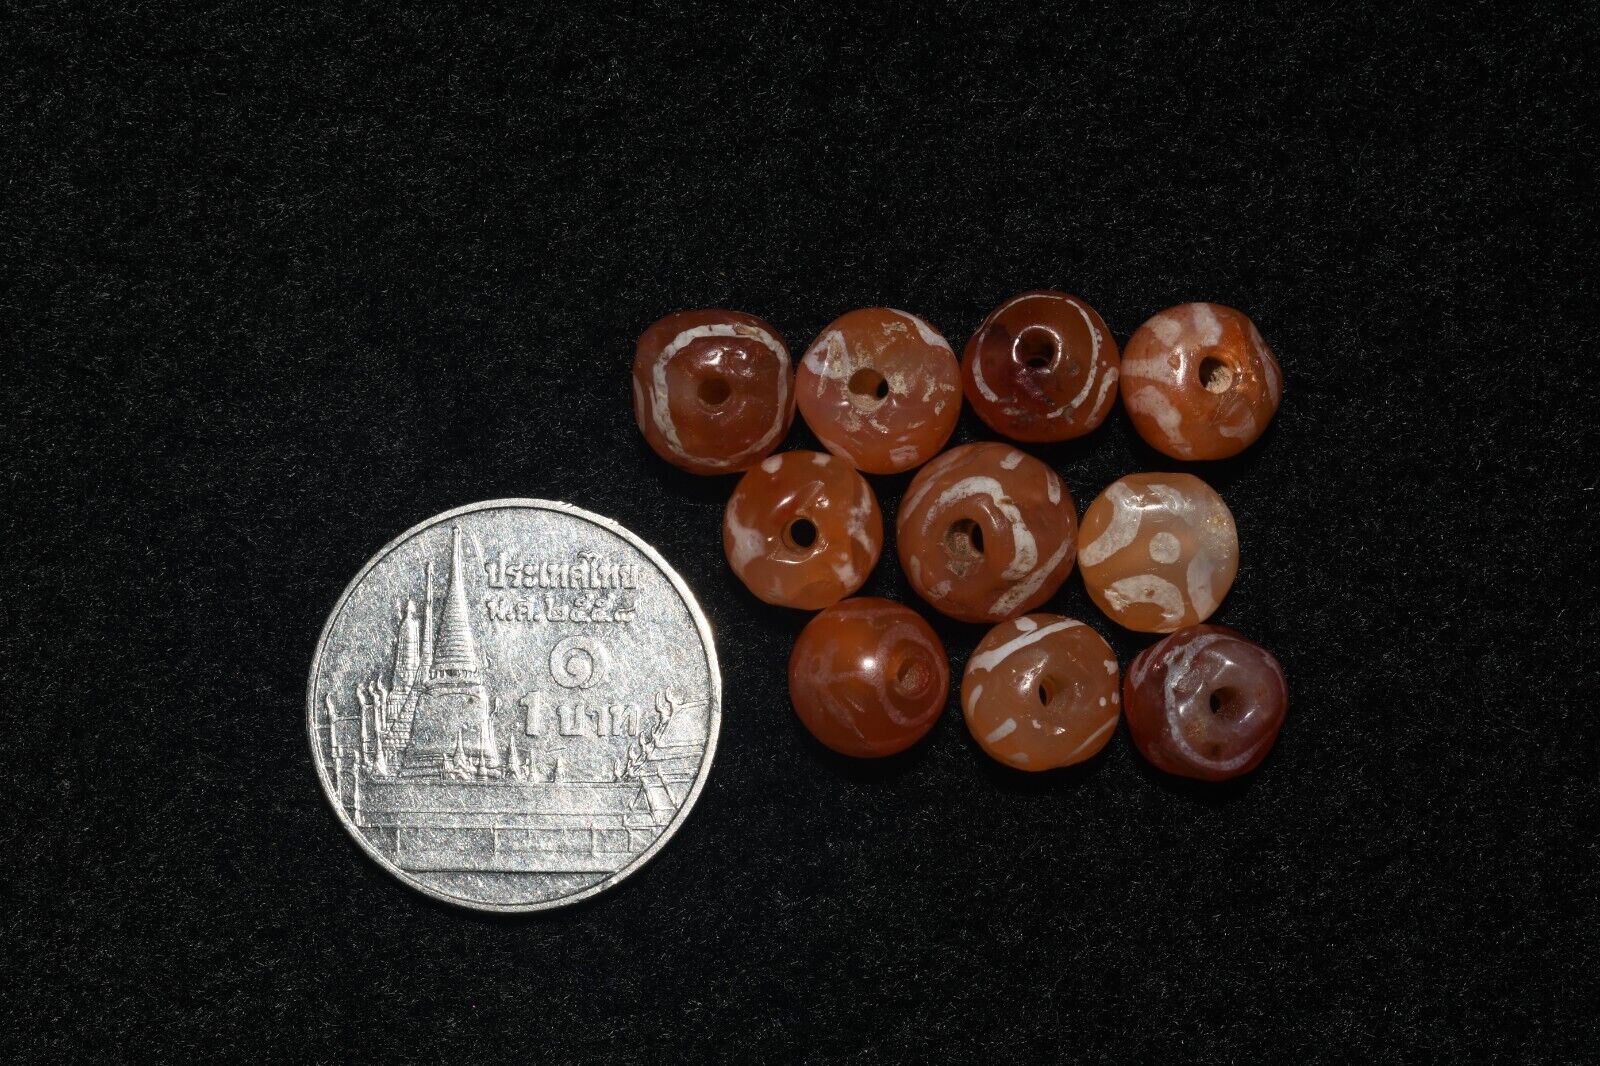 Authentic 10 Ancient Indus Valley Etched Round Carnelian Beads Ca. 2600-1700 BCE Без бренда - фотография #9